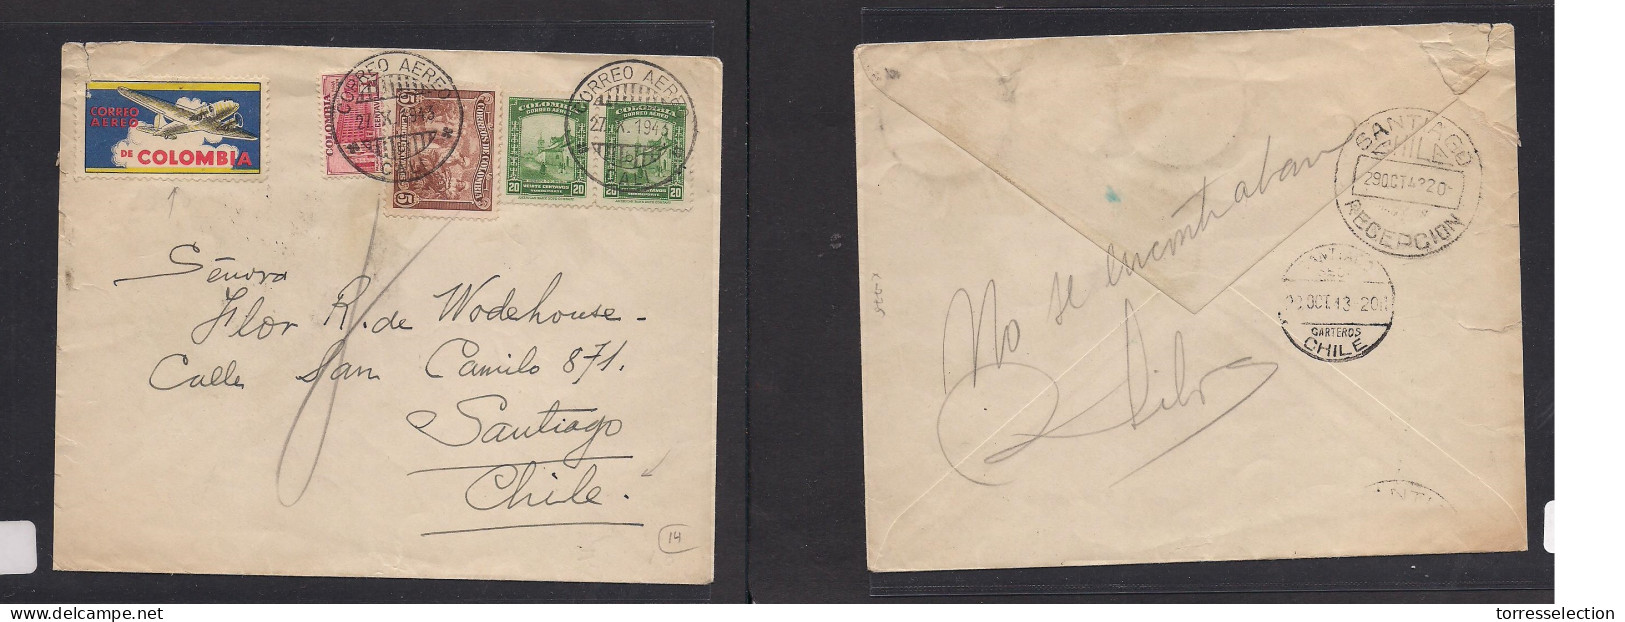 COLOMBIA. Colombia - Cover - 1943 Cali To Chile Air COLOMBIA Mult Fkd Env +color Label, Better Dest Usage. Easy Deal. - Colombie